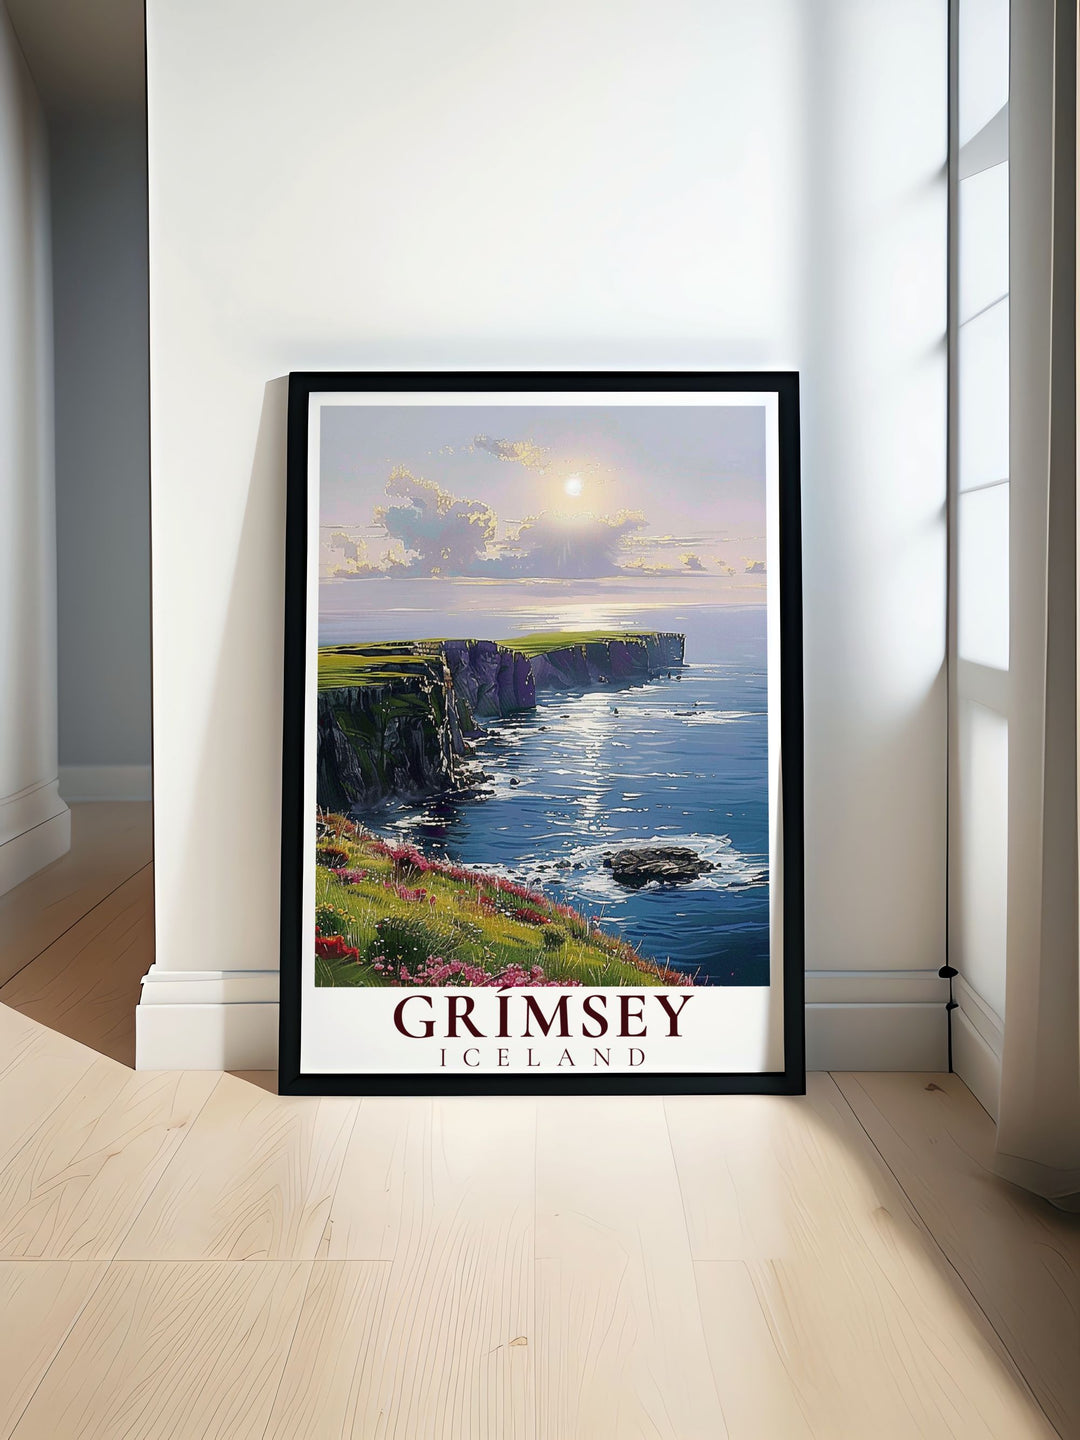 Capturing the enchanting Northern Lights over Grimsey, this travel poster showcases the islands stunning night sky, making it an ideal piece for those who love celestial phenomena.